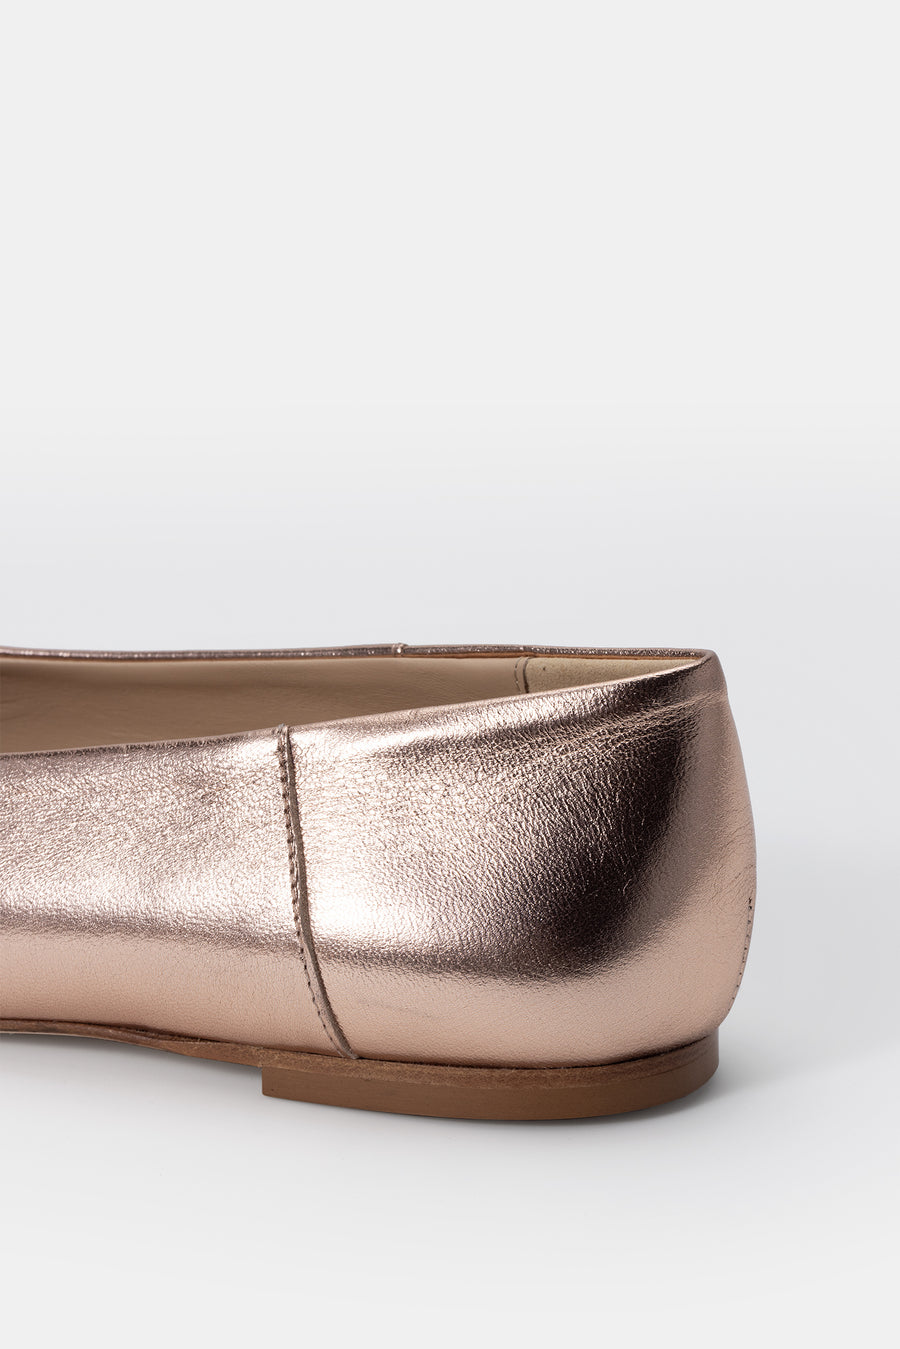 The Cellina Rose Gold